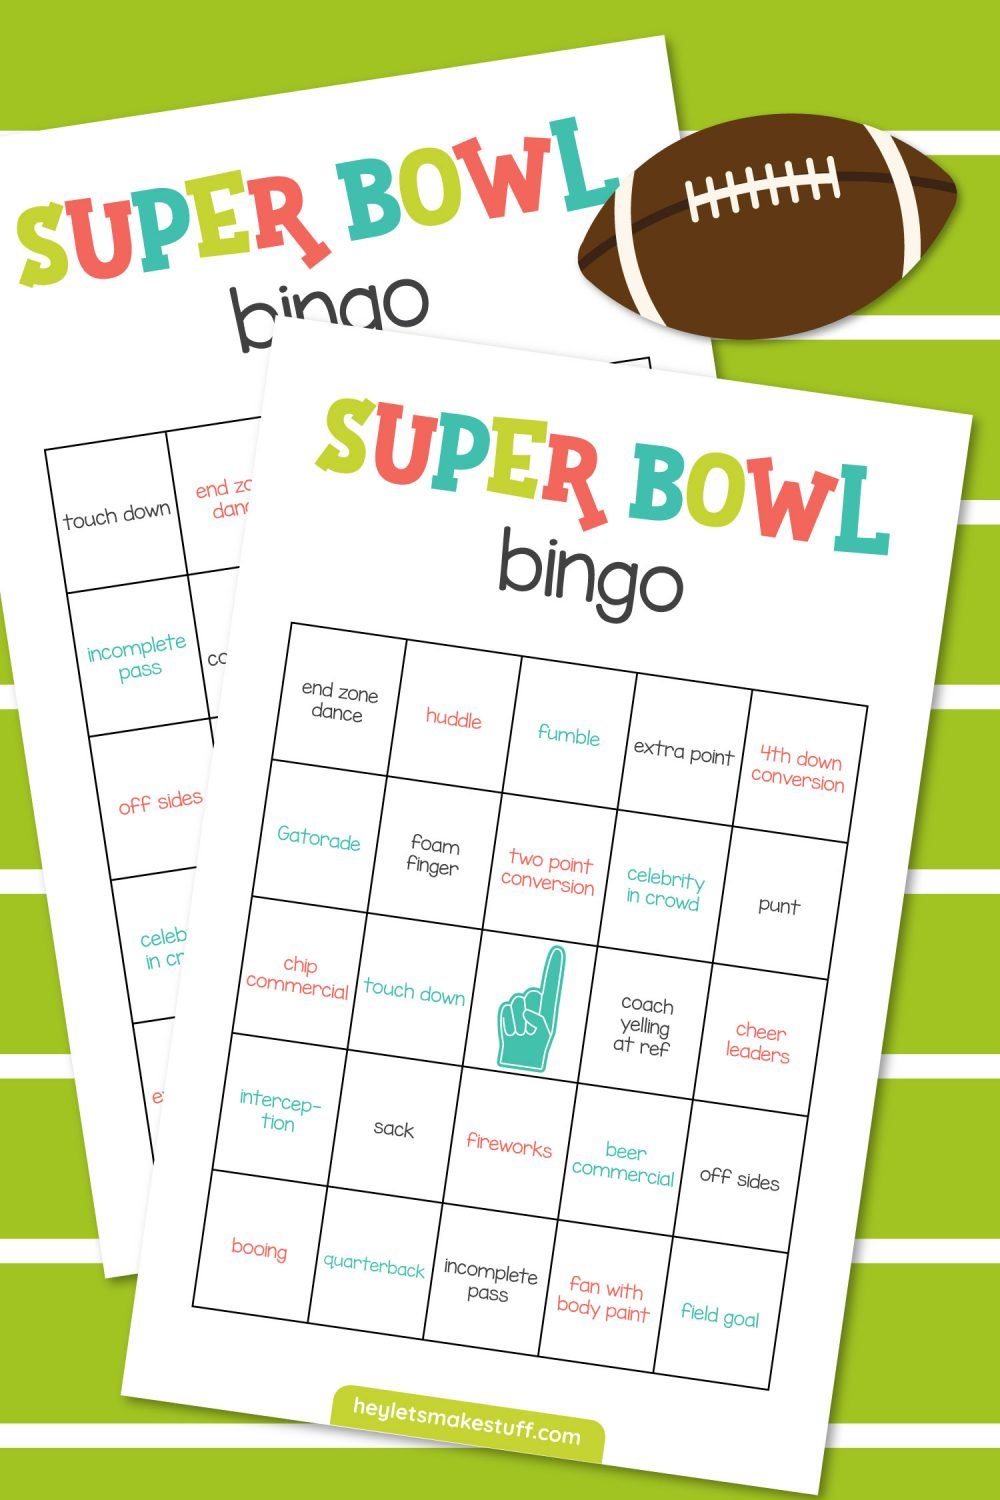 Mockup of super bowl bingo on green and white striped background